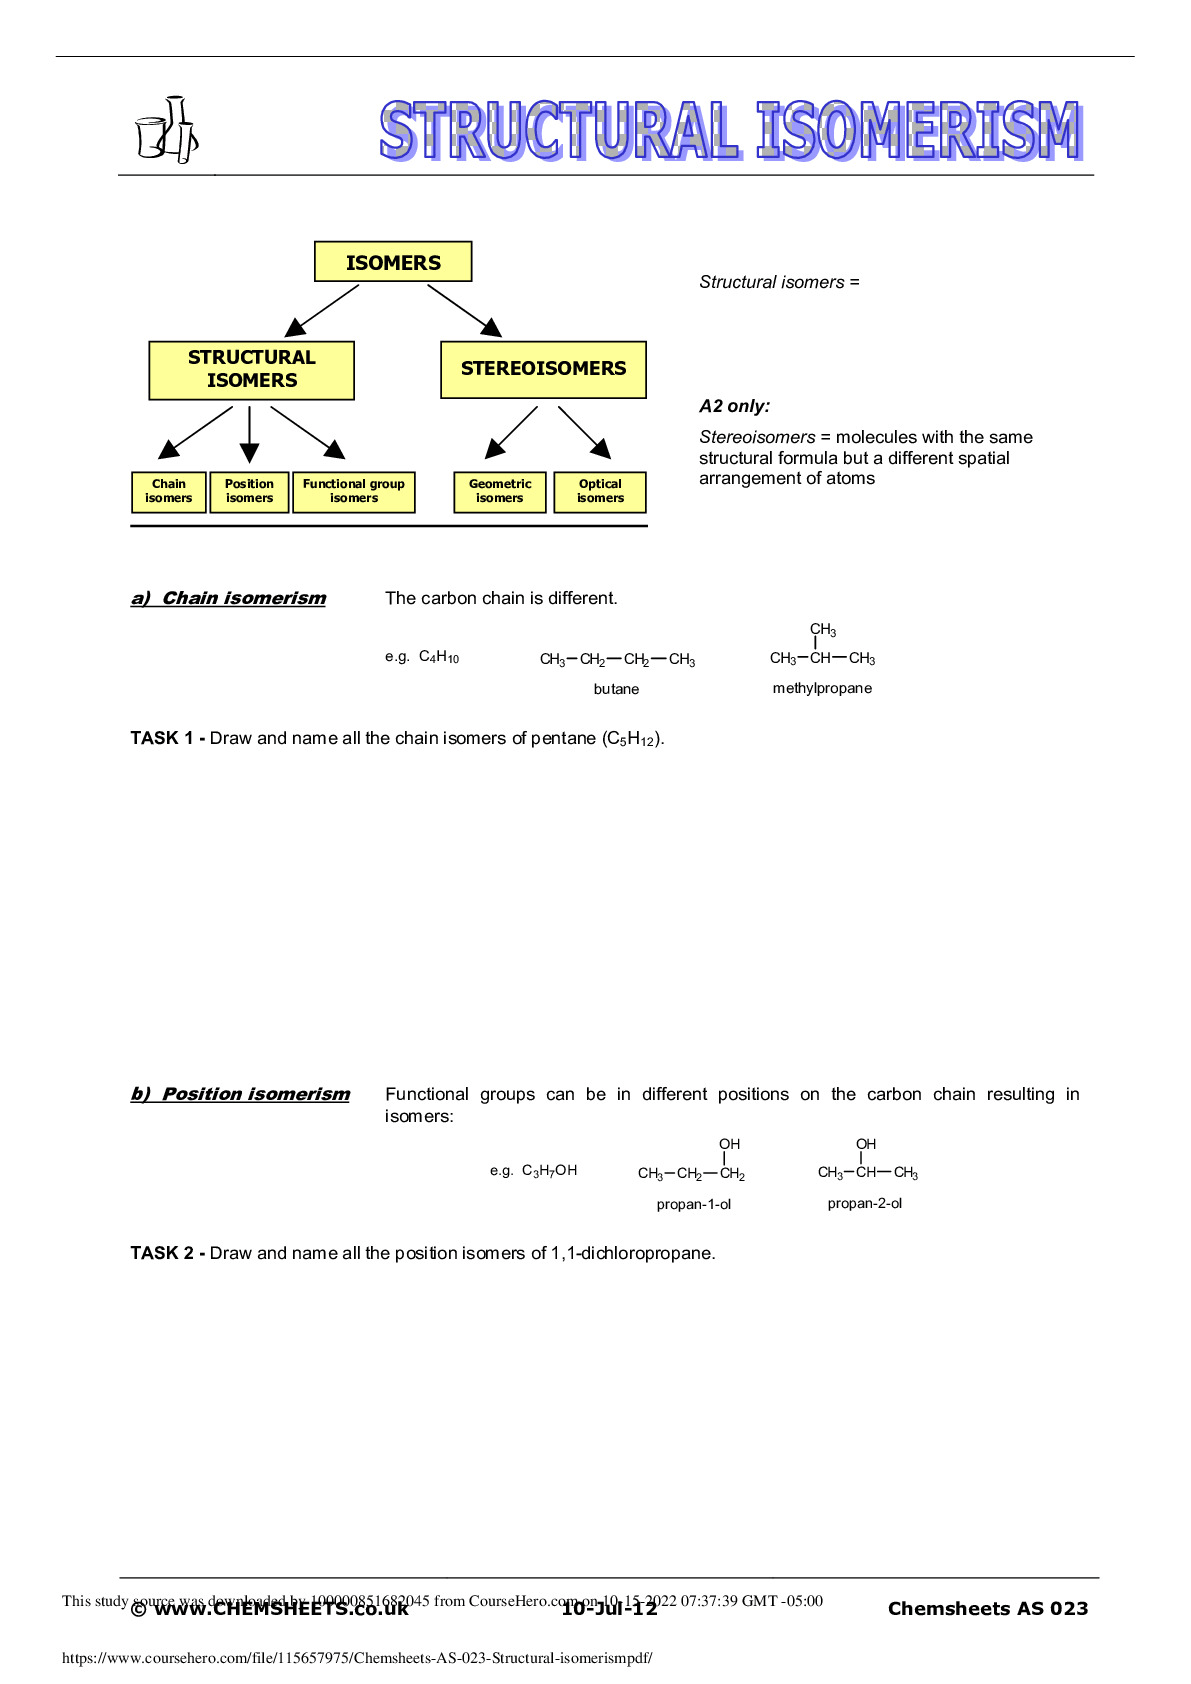 Chemsheets_AS_023__Structural_isomerism_.pdf